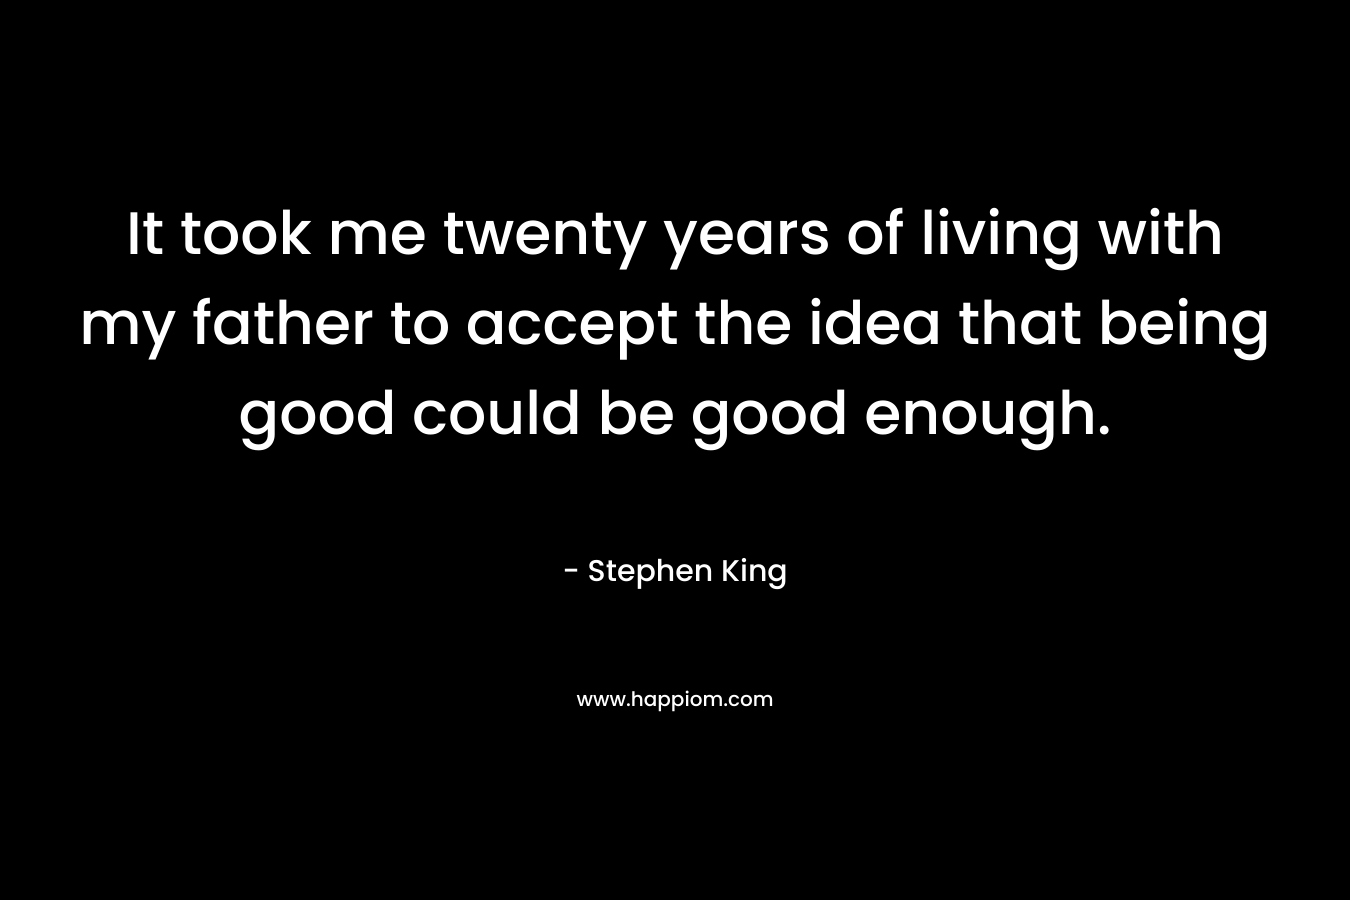 It took me twenty years of living with my father to accept the idea that being good could be good enough.